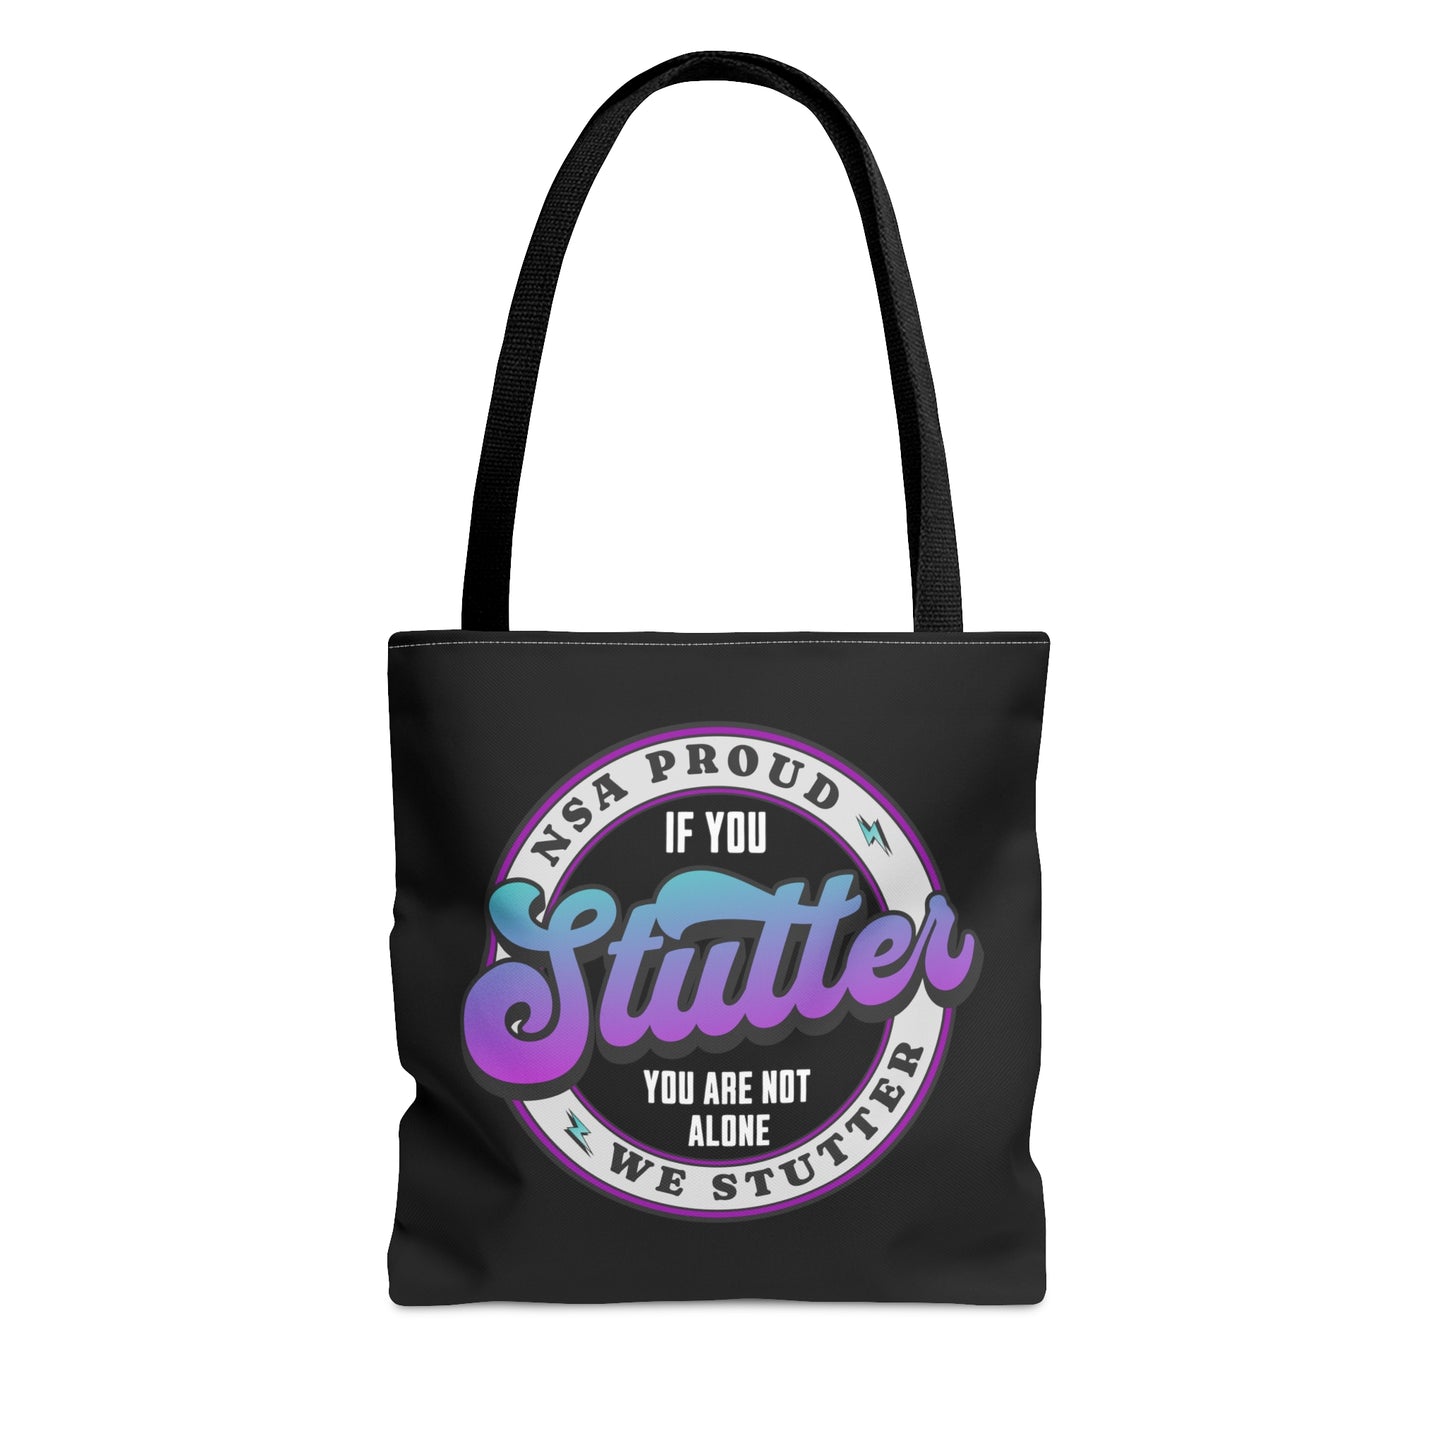 NSA Conference We Stutter If You Stutter You Are Note Alone - Tote Bag